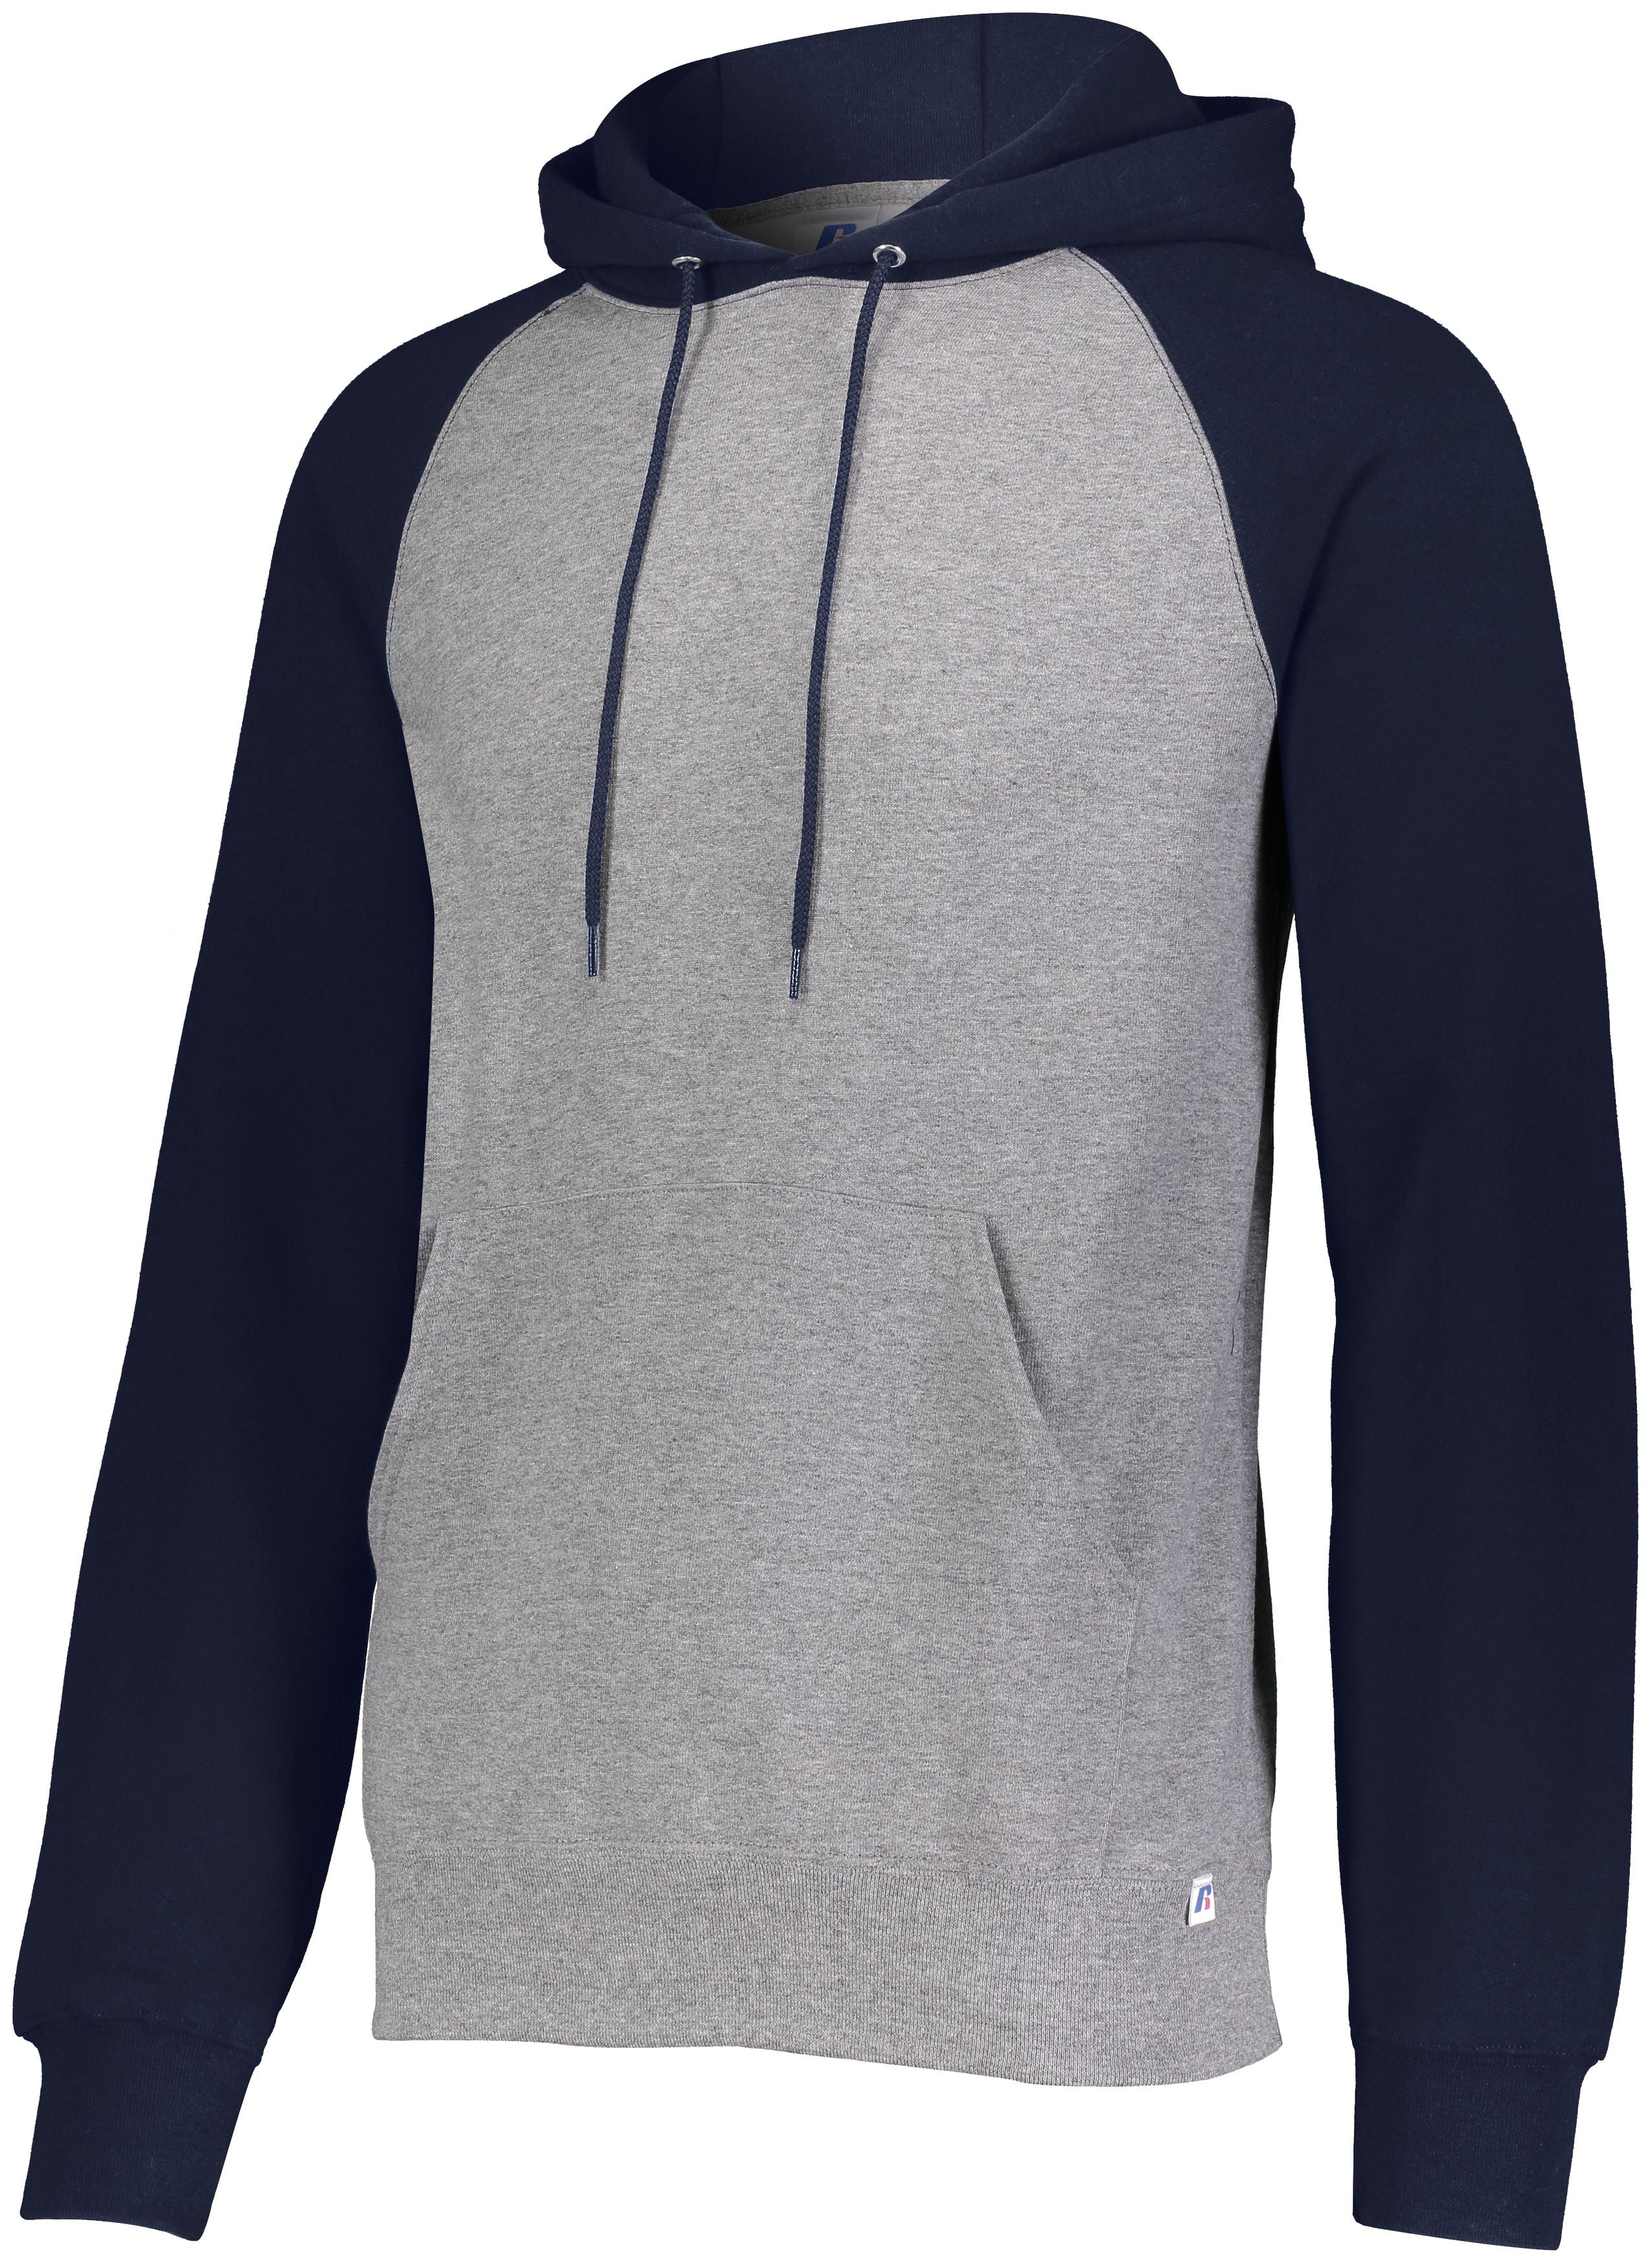 Russell Athletic Dri-Power  Fleece Colorblock Hoodie in Oxford/Navy  -Part of the Adult, Russell-Athletic-Products, Shirts product lines at KanaleyCreations.com